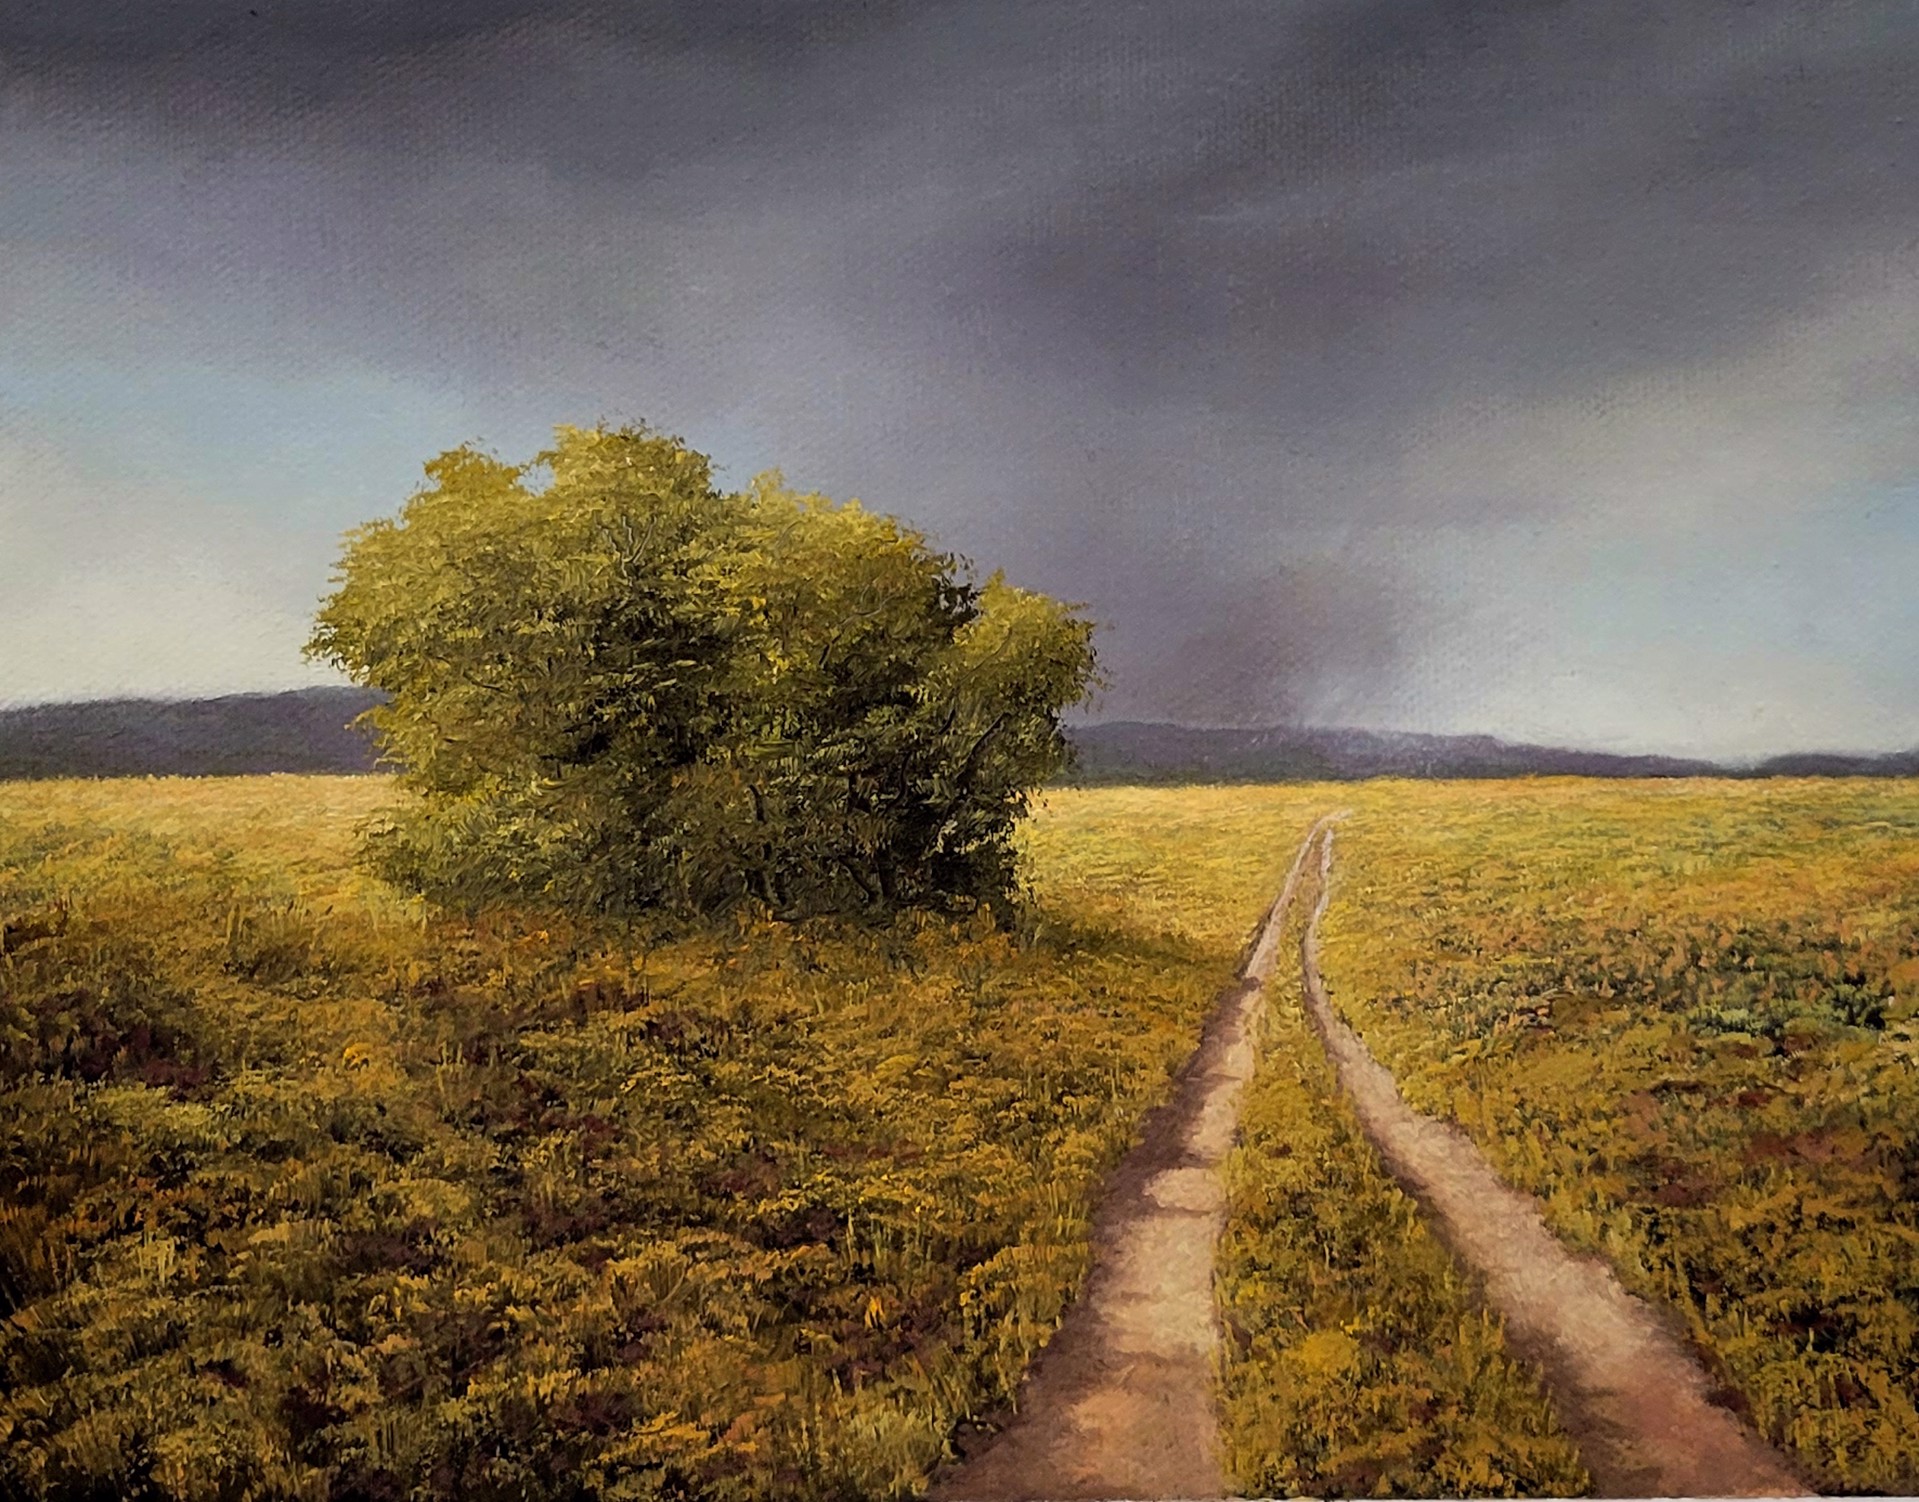 The Road to There by Greg Skol